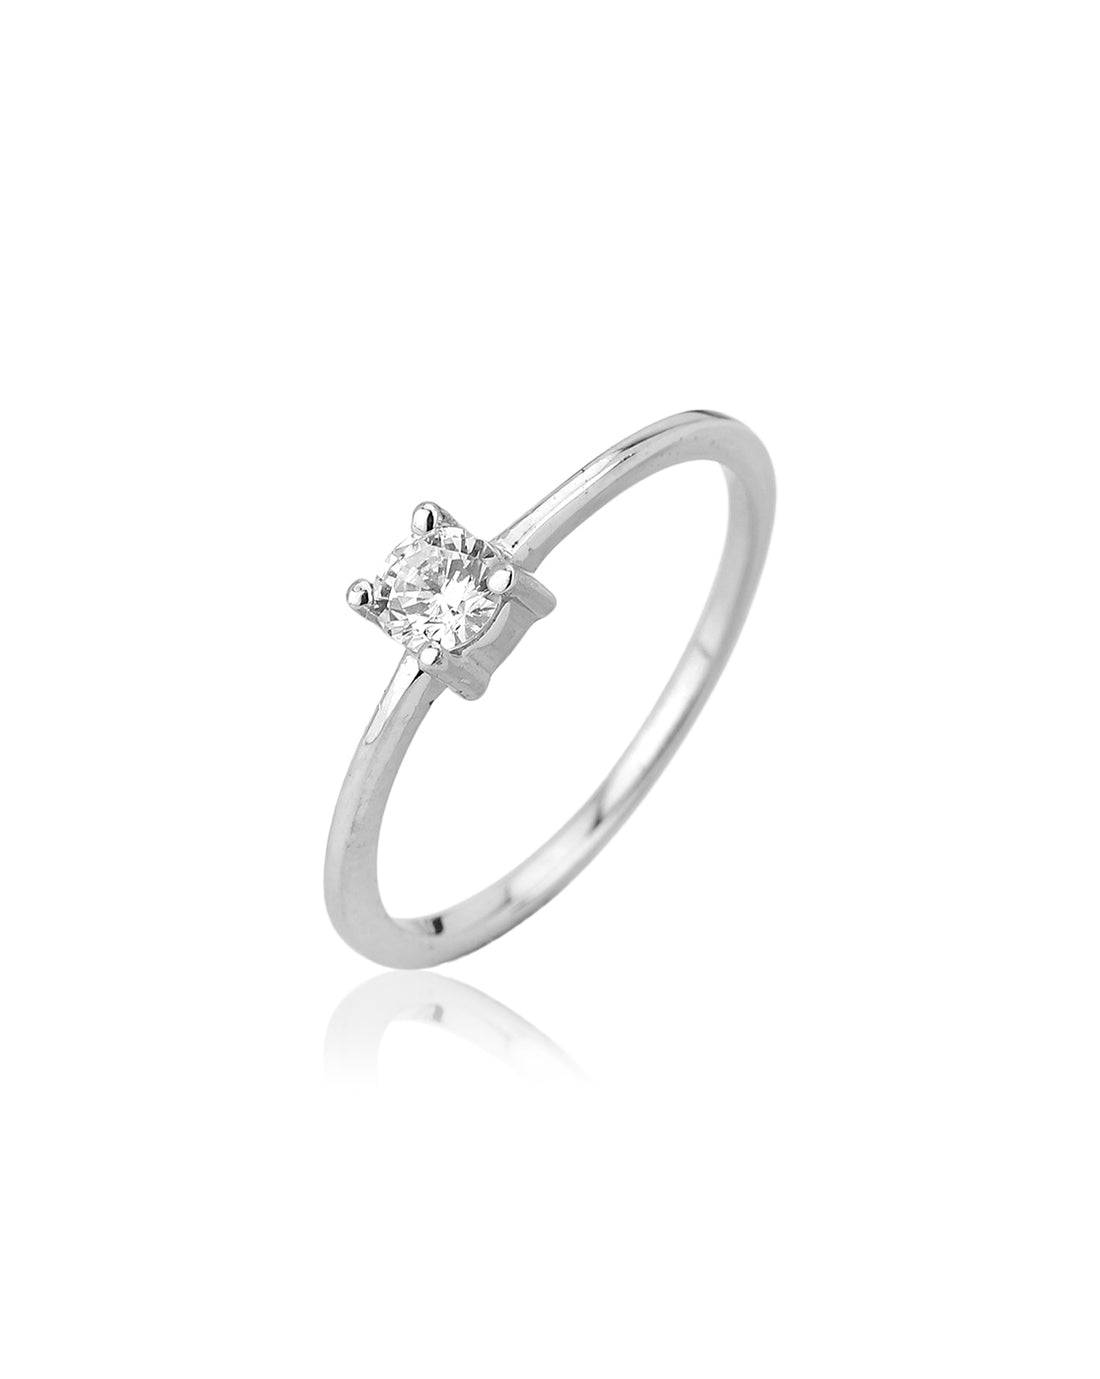 Carlton London 925 Sterling Silver Rhodium Plated Silver Toned Cz Stone Studded Finger Ring For Women